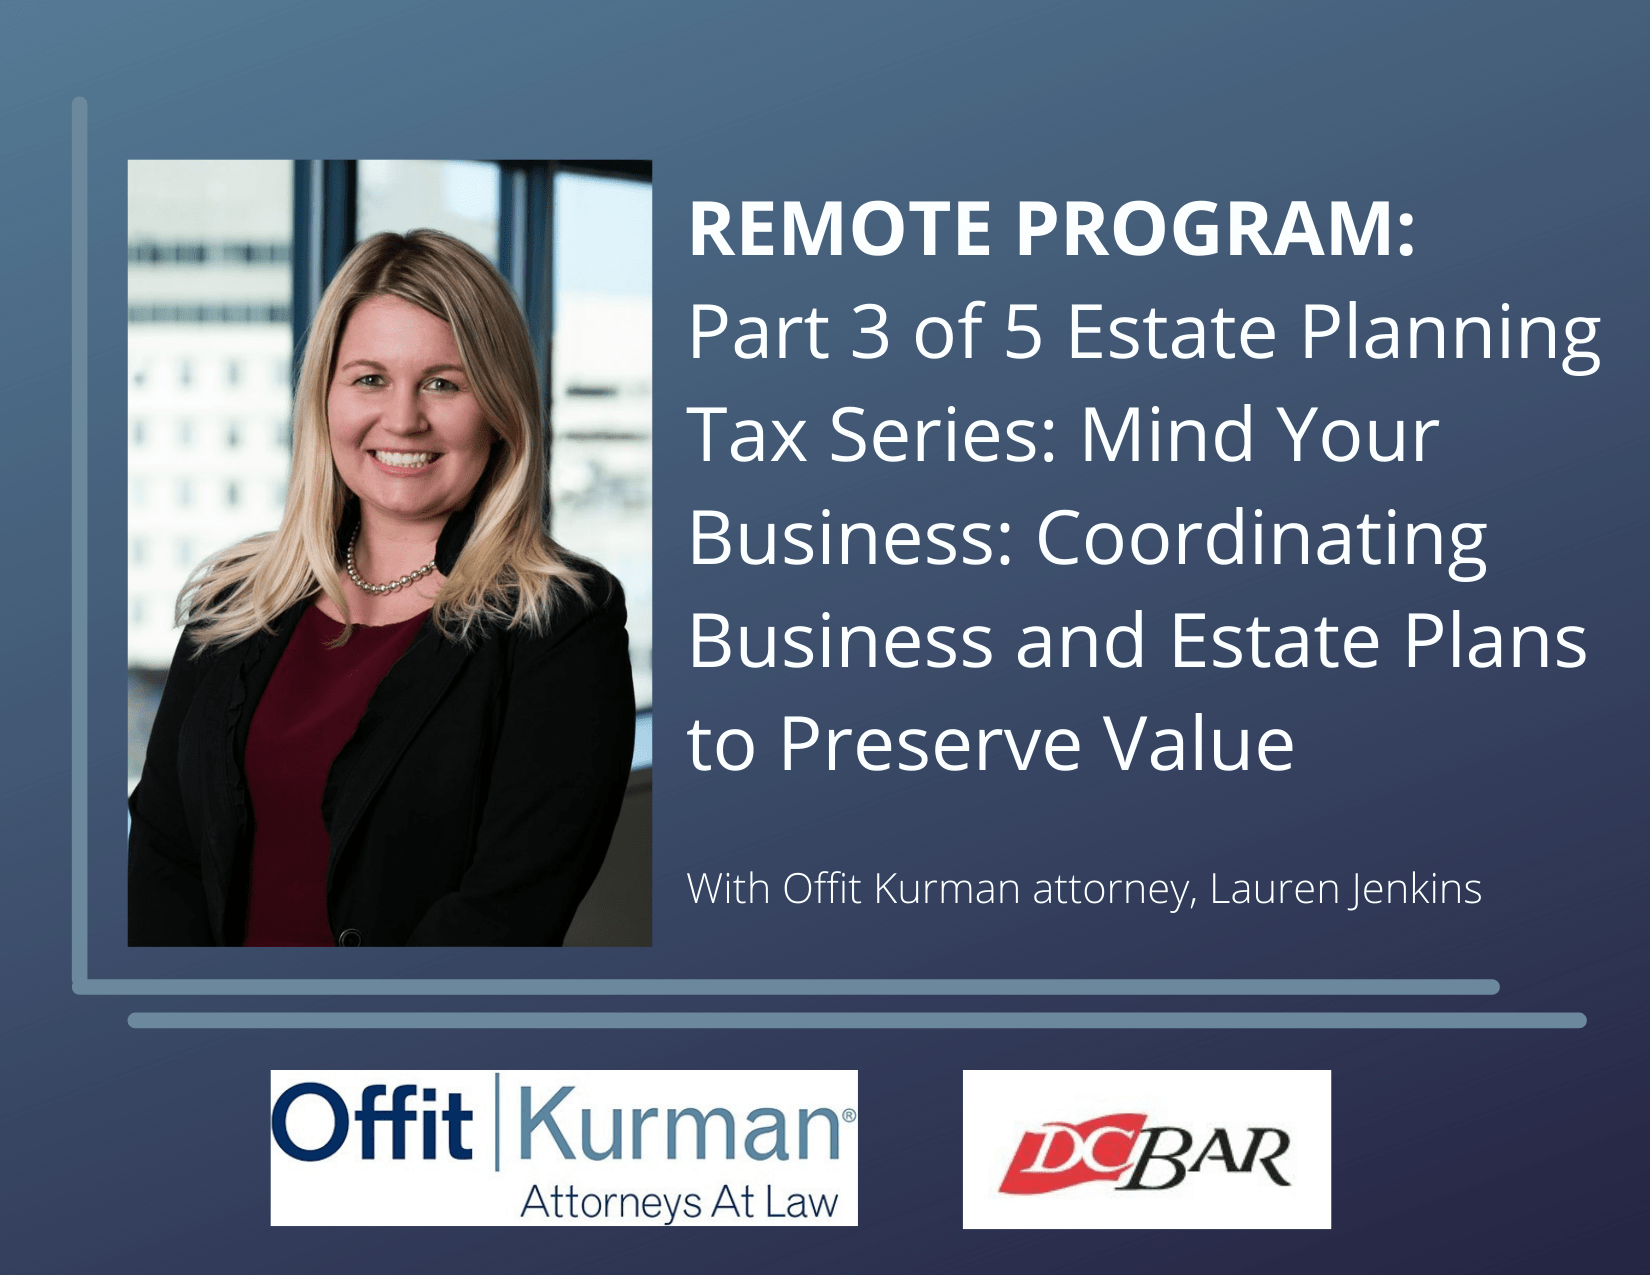 Lauren Jenkins REMOTE PROGRAM_ Part 3 of 5 Estate Planning Tax Series_ Mind Your Business_ Coordinating Business and Estate Plans to Preserve Value (1)